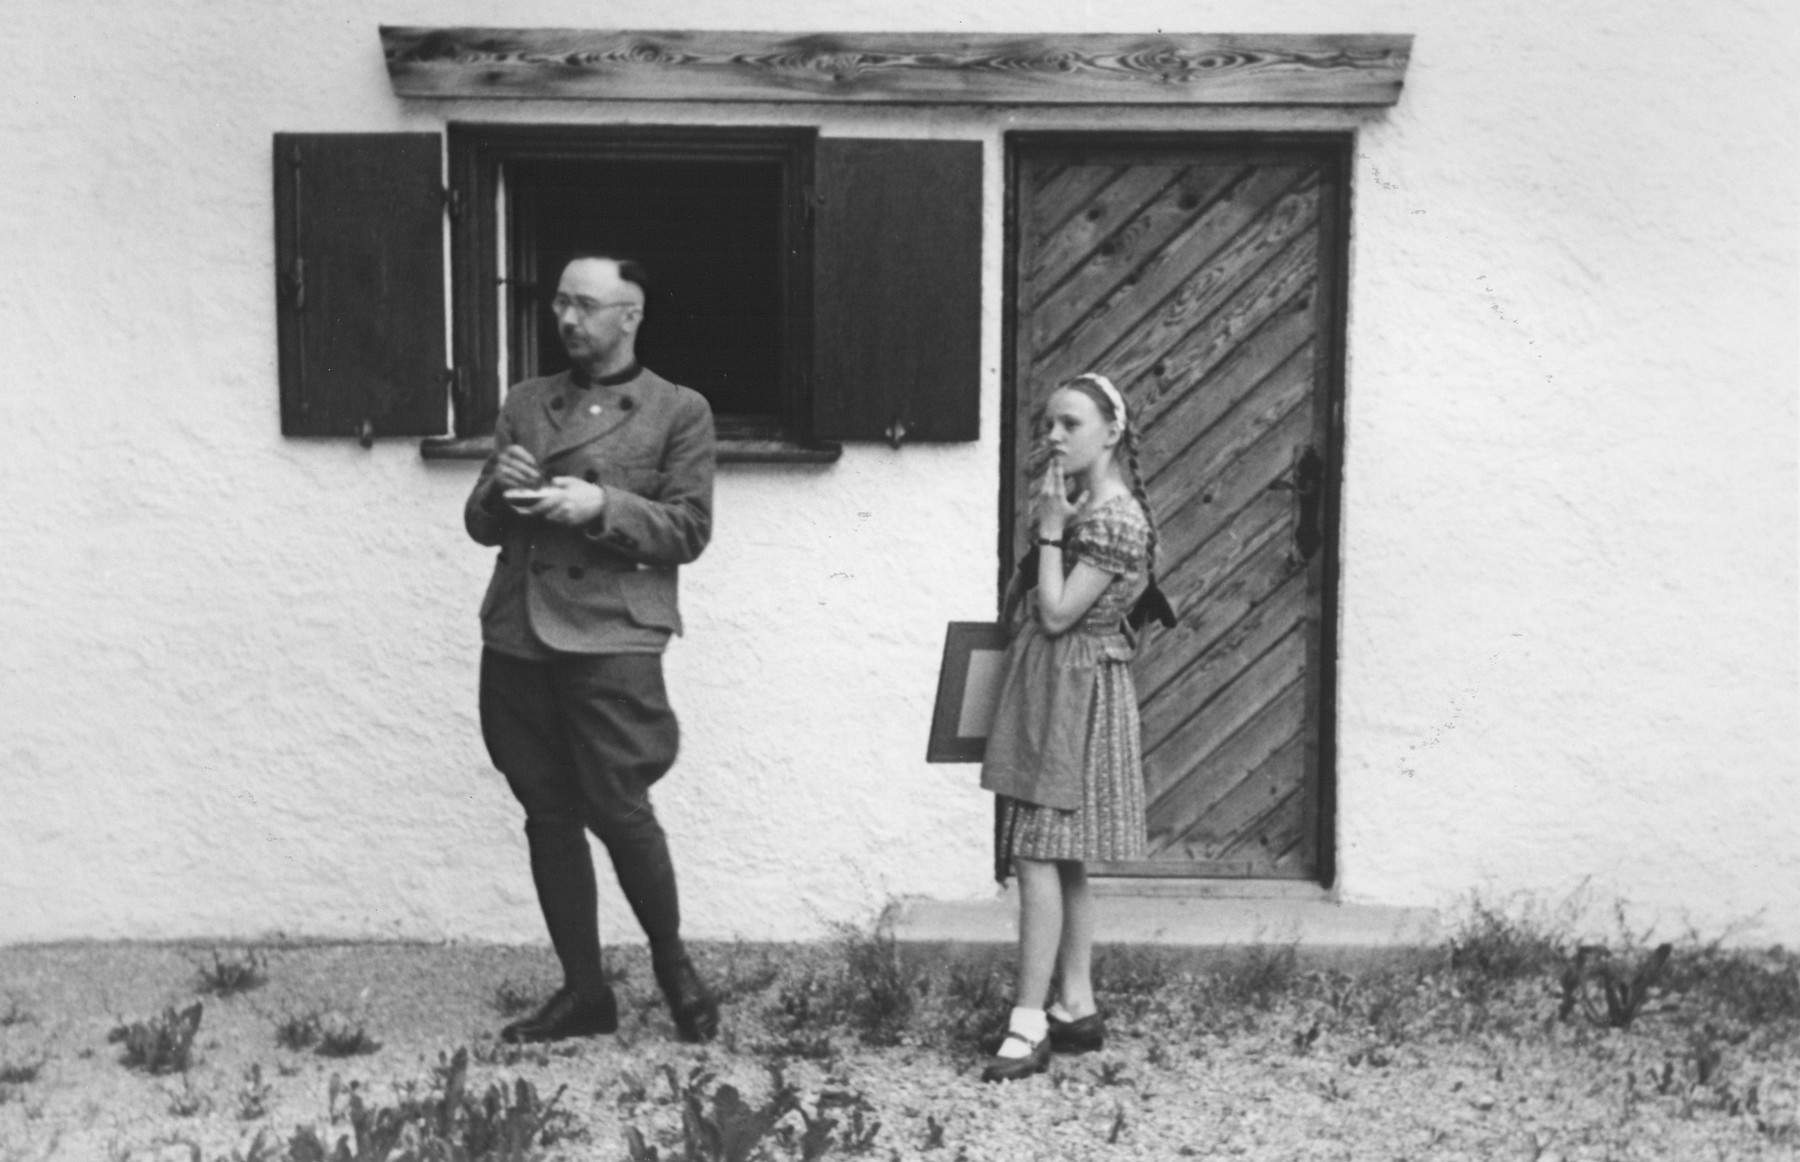 Heinrich Himmler with his daughter Gudrun in front of their home in Gmund am Tegernsee.